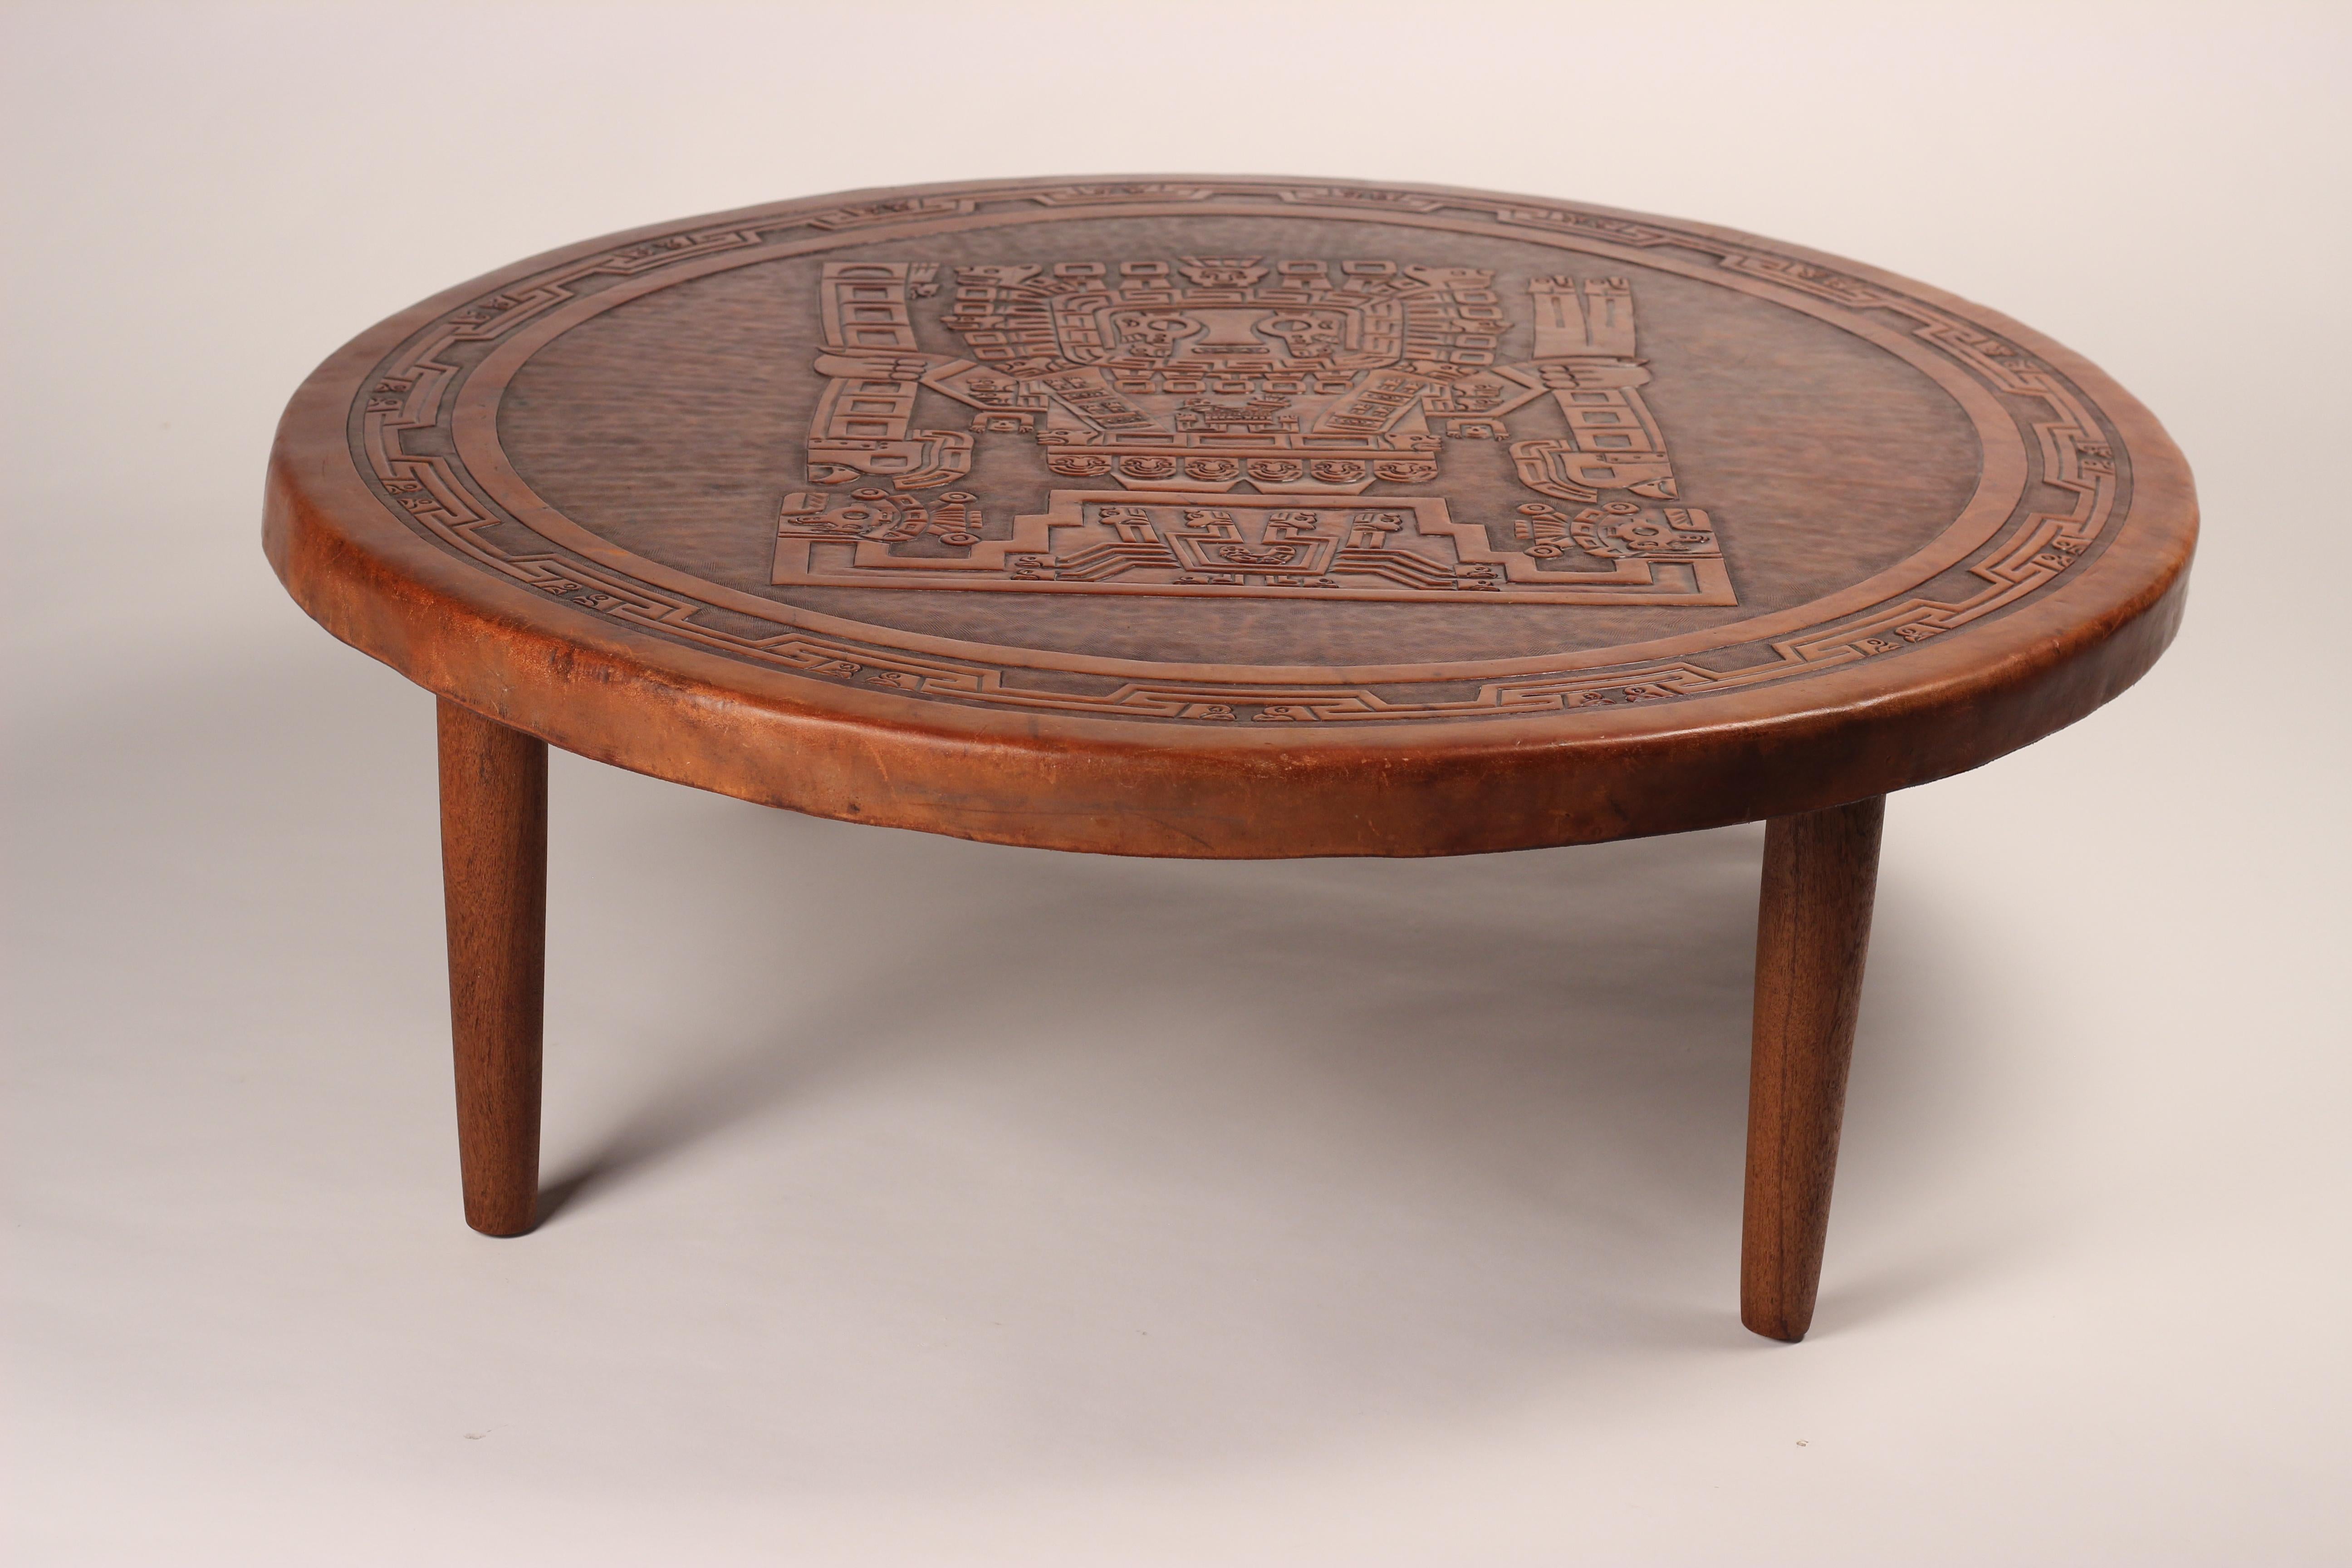 The work of Ecuadorian furniture maker Angel Pazmiño has been internationally recognized since the 1960s, when he was part of an initiative by the US Agency for International Development to create modern furniture from sustainable local materials.